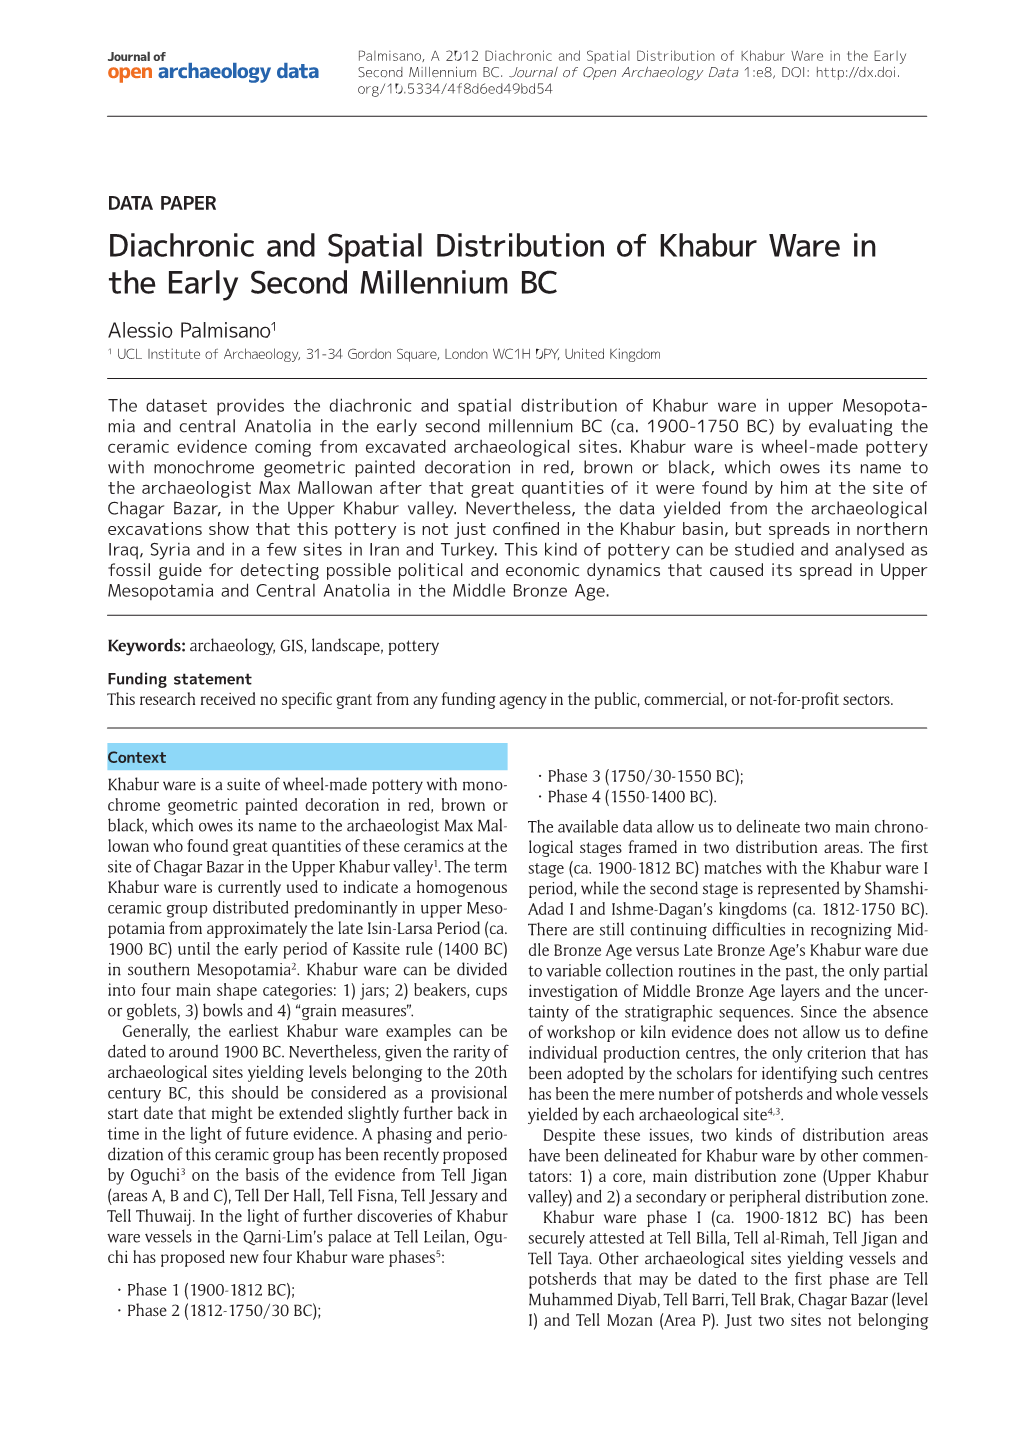 Diachronic and Spatial Distribution of Khabur Ware in the Early Second